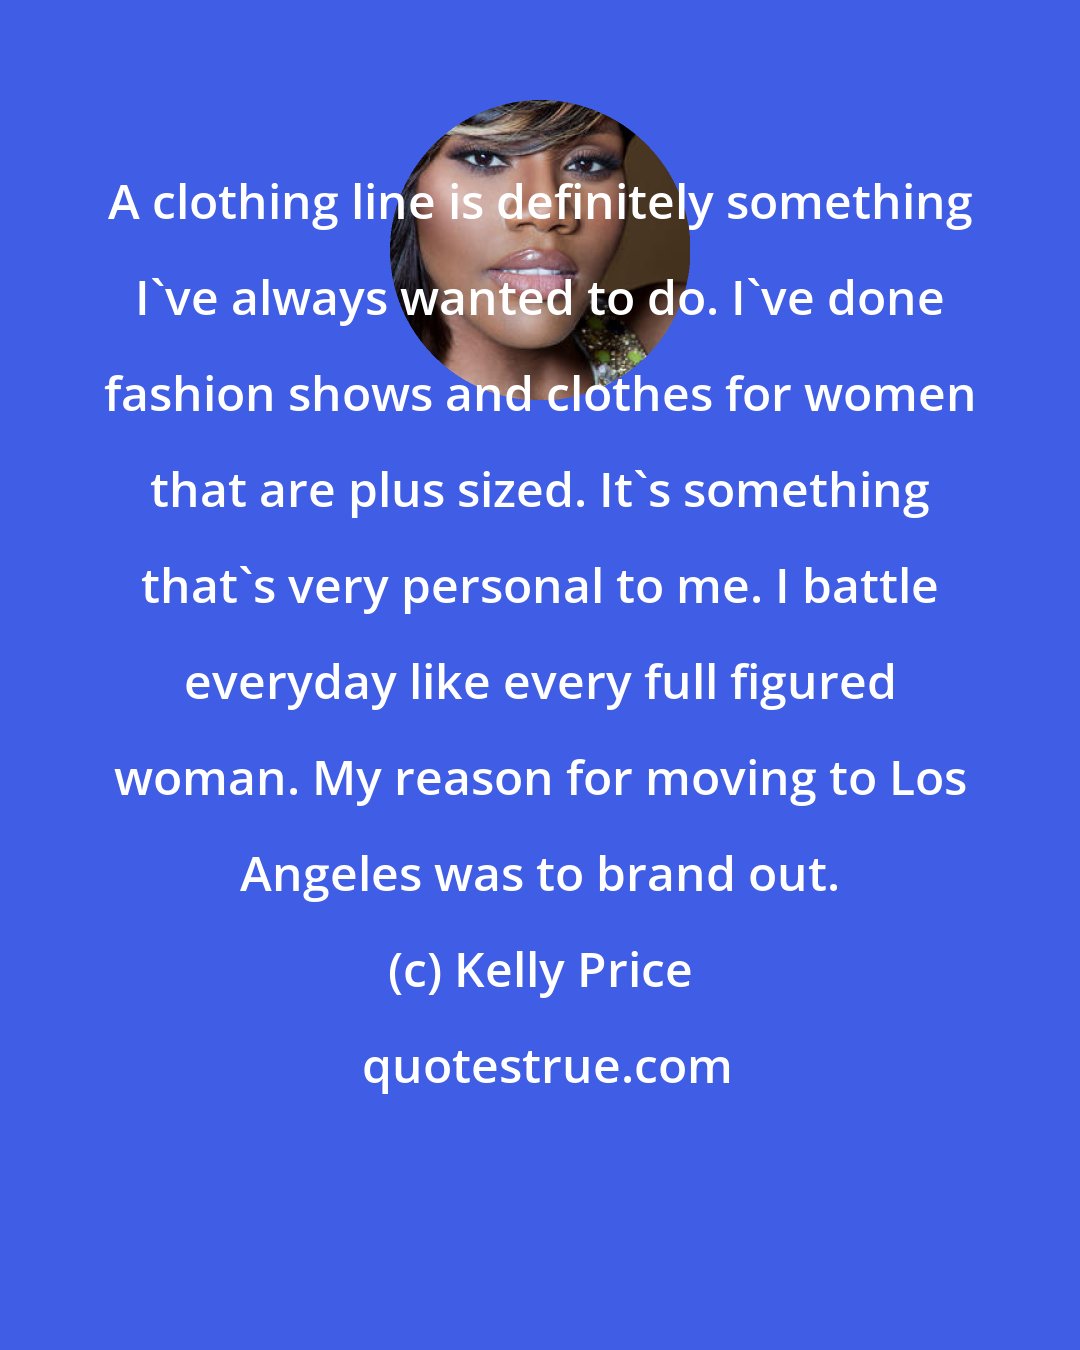 Kelly Price: A clothing line is definitely something I've always wanted to do. I've done fashion shows and clothes for women that are plus sized. It's something that's very personal to me. I battle everyday like every full figured woman. My reason for moving to Los Angeles was to brand out.